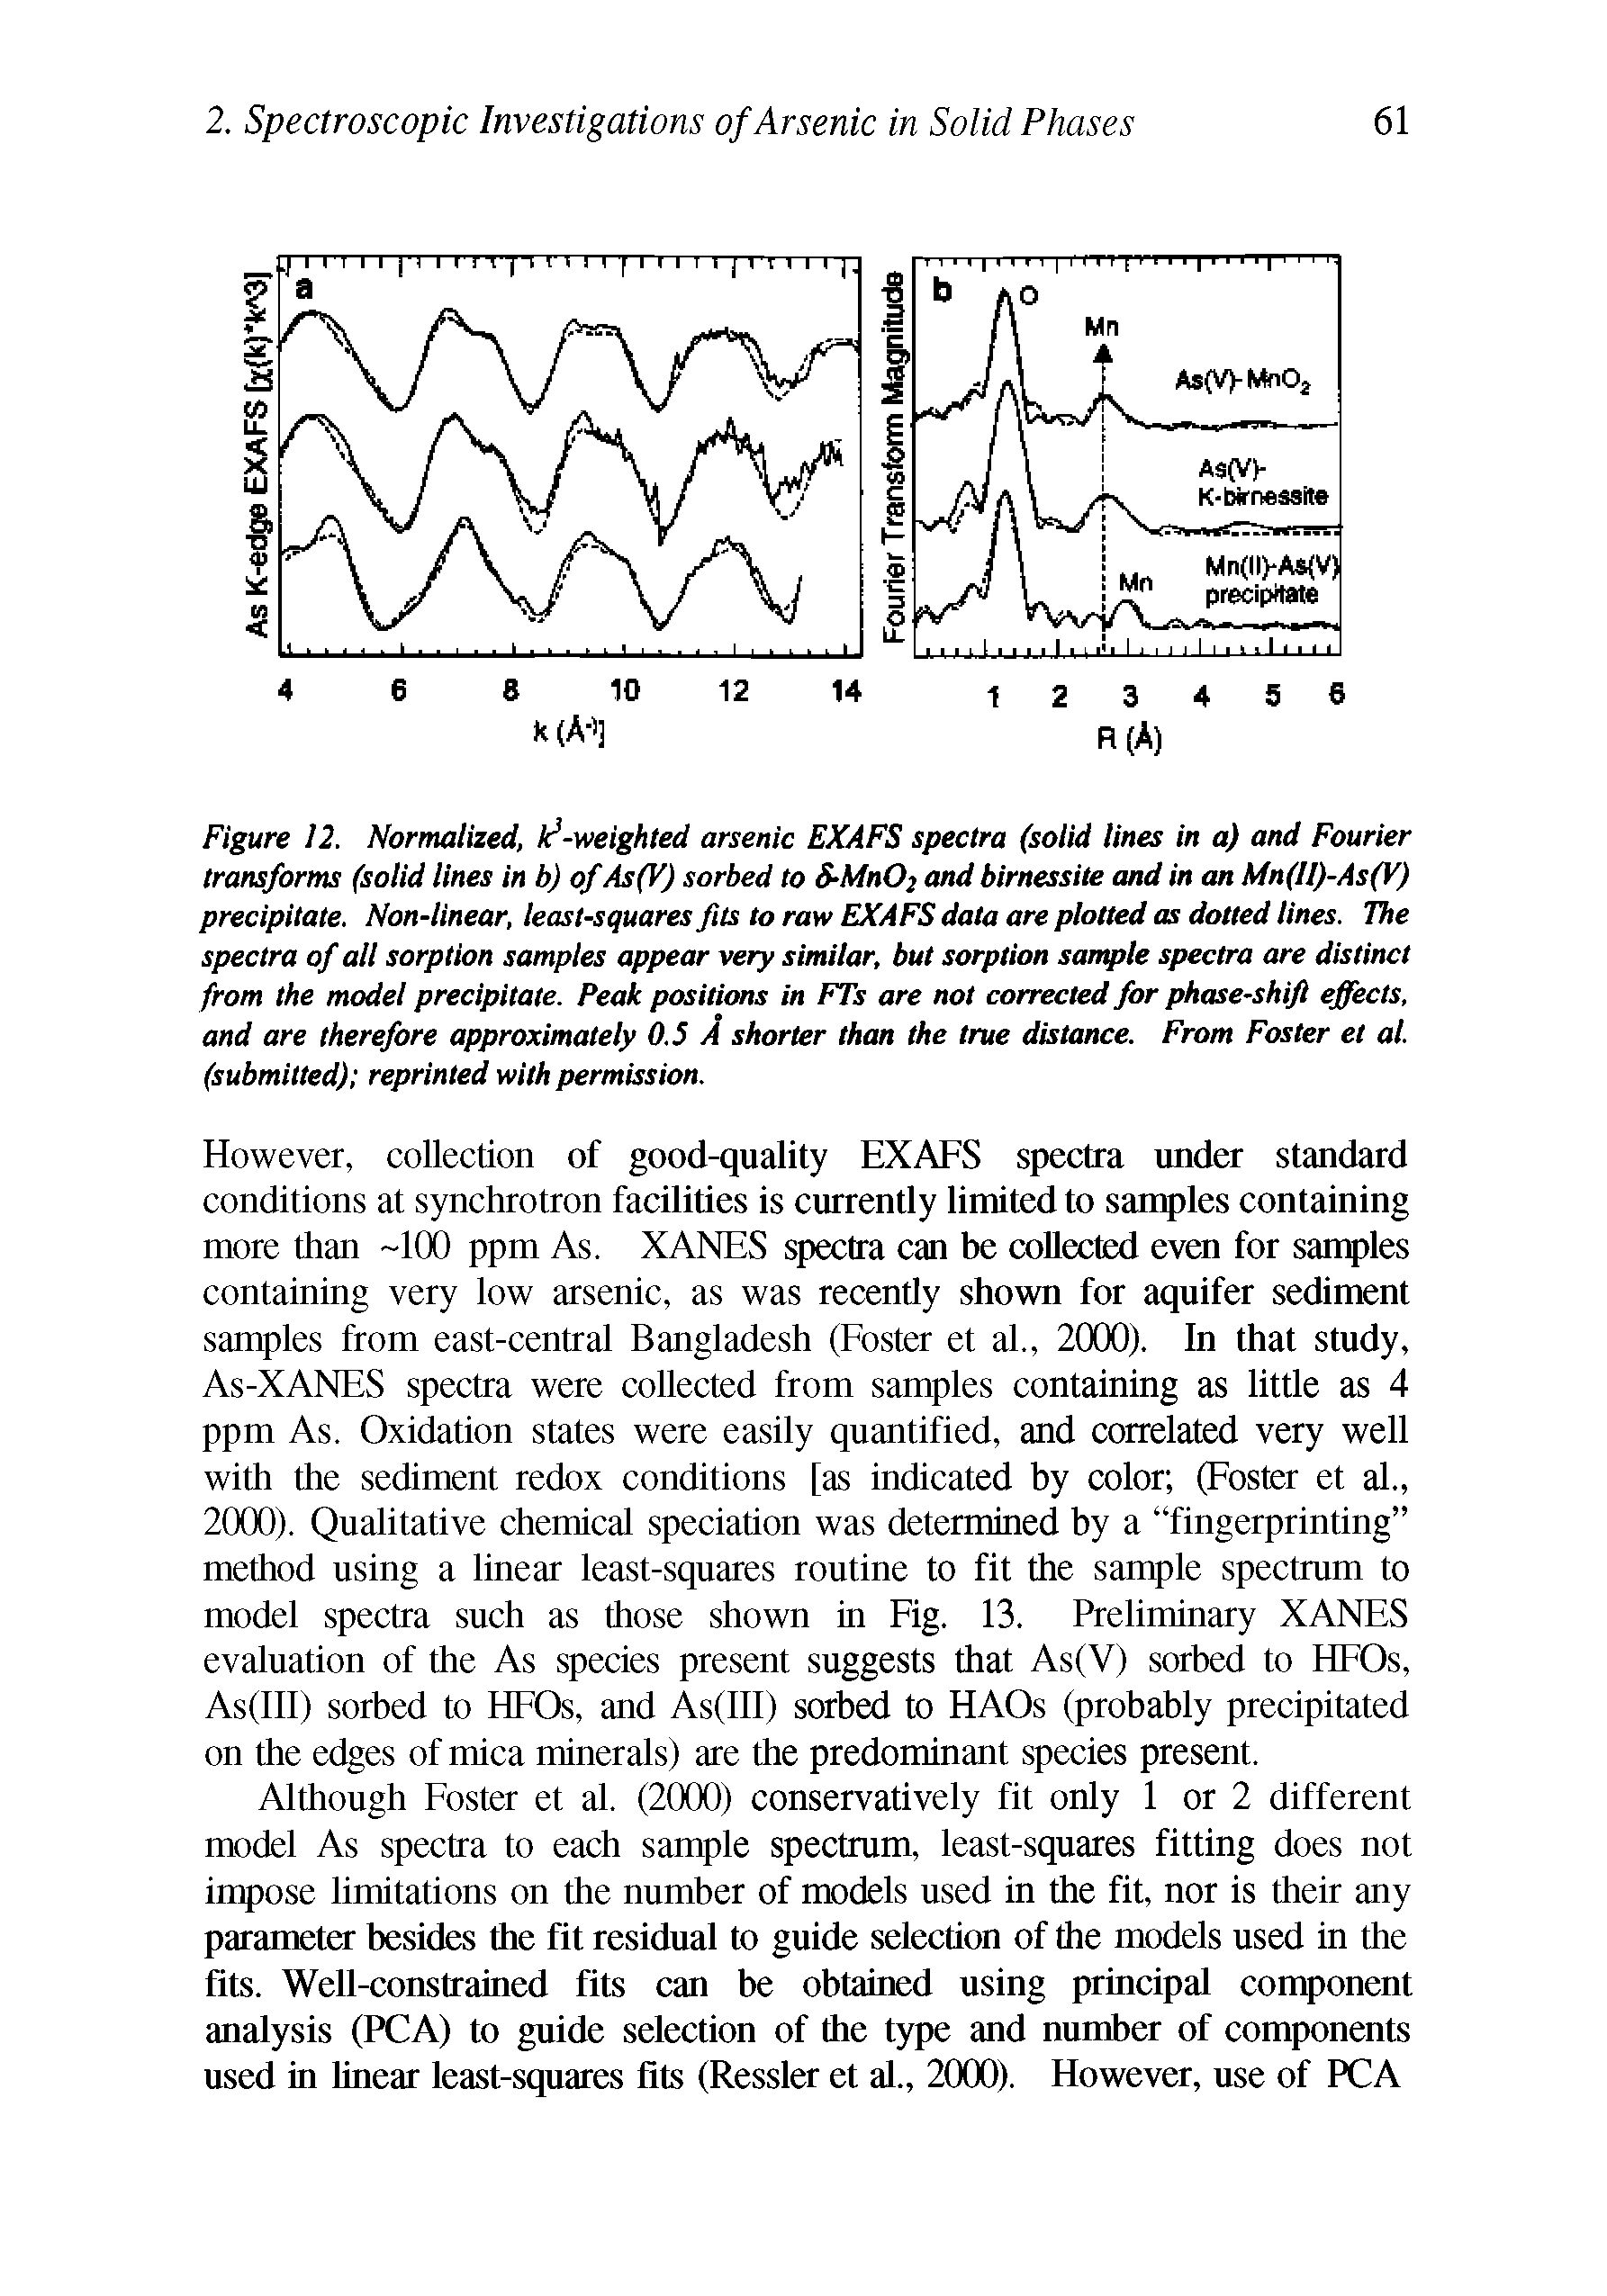 Figure 12. Normalized, -weighted arsenic EXAFS spectra (soiid lines in a) and Fourier transforms (solid lines in b) of As(V) sorbed to S-Mn02 and birnessite and in an Mn(ll)-As(V) precipitate. Non-linear, least-squares fits to raw EXAFS data are plotted as dotted lines. The spectra of all sorption samples appear very similar, but sorption sample spectra are distinct from the model precipitate. Peak positions in FTs are not corrected for phase-shift effects, and are therefore approximately 0.5 A shorter than the true distance. From Foster et al. (submitted) reprinted with permission.